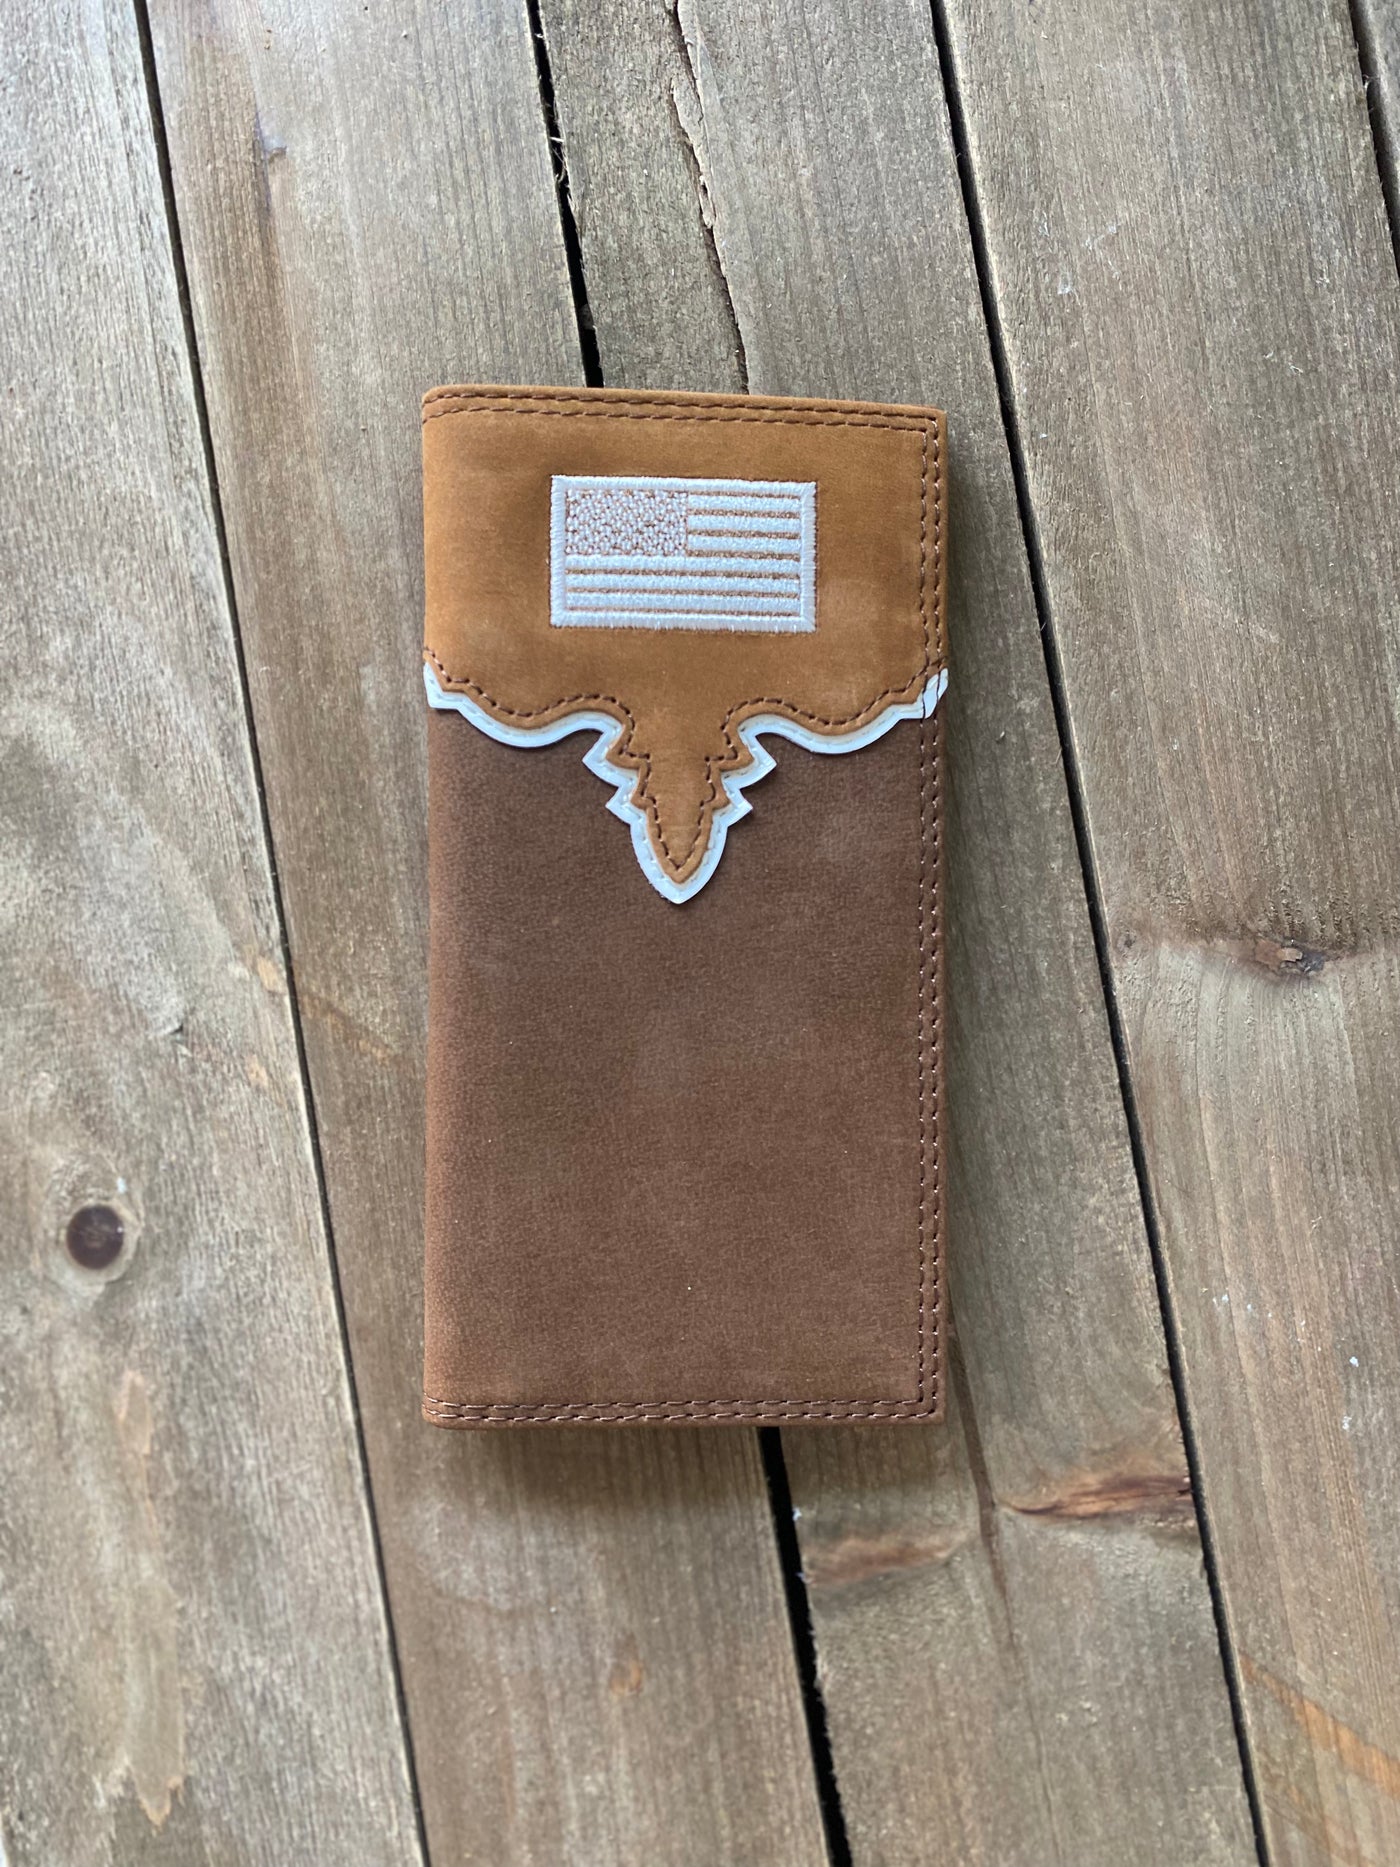 Justin's Rodeo Wallet Yoke With USA Flag